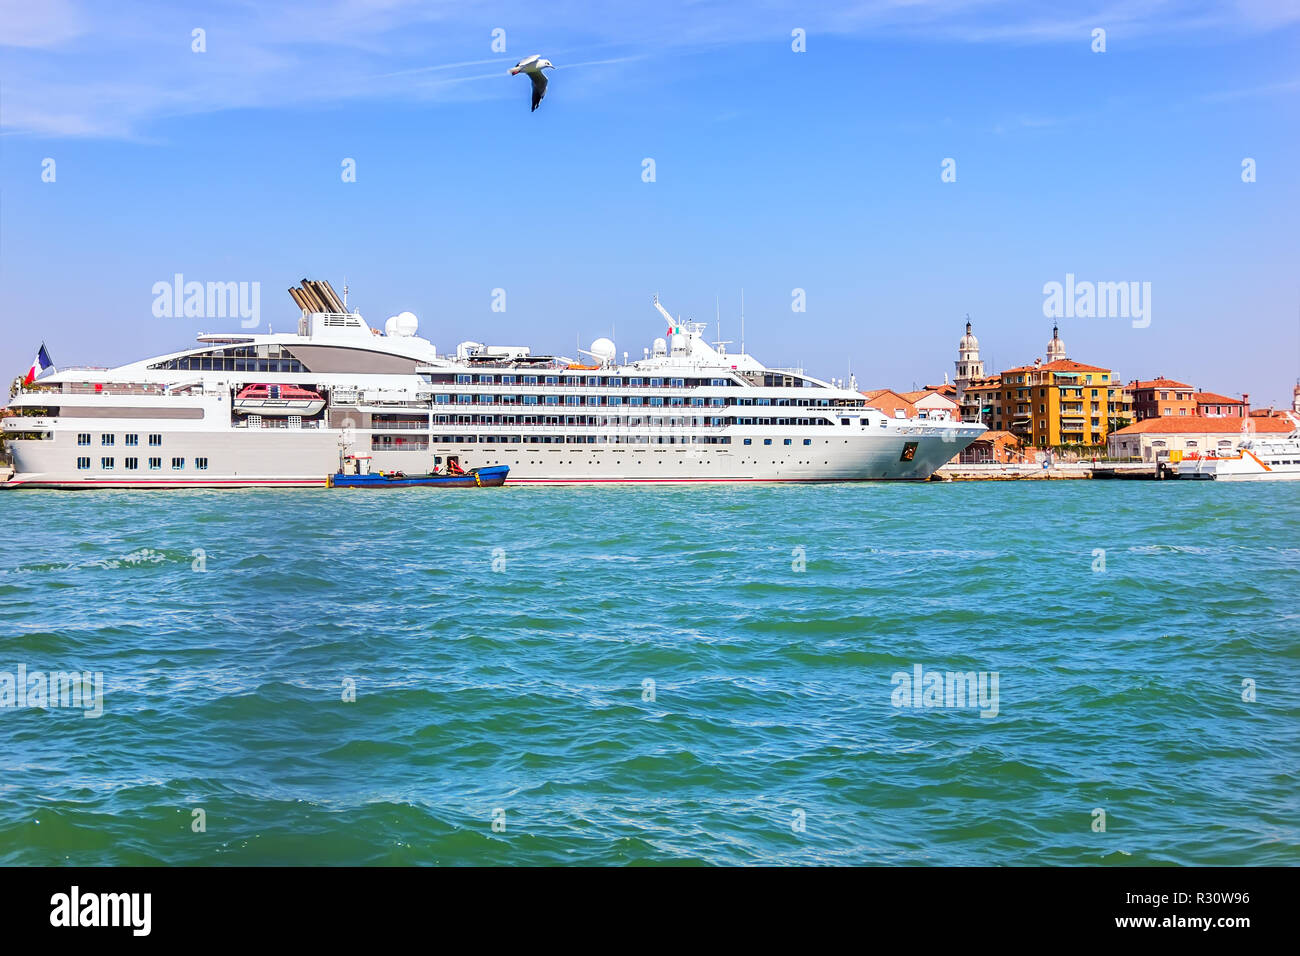 Cruise ship in the port of Venice, Italy Stock Photo